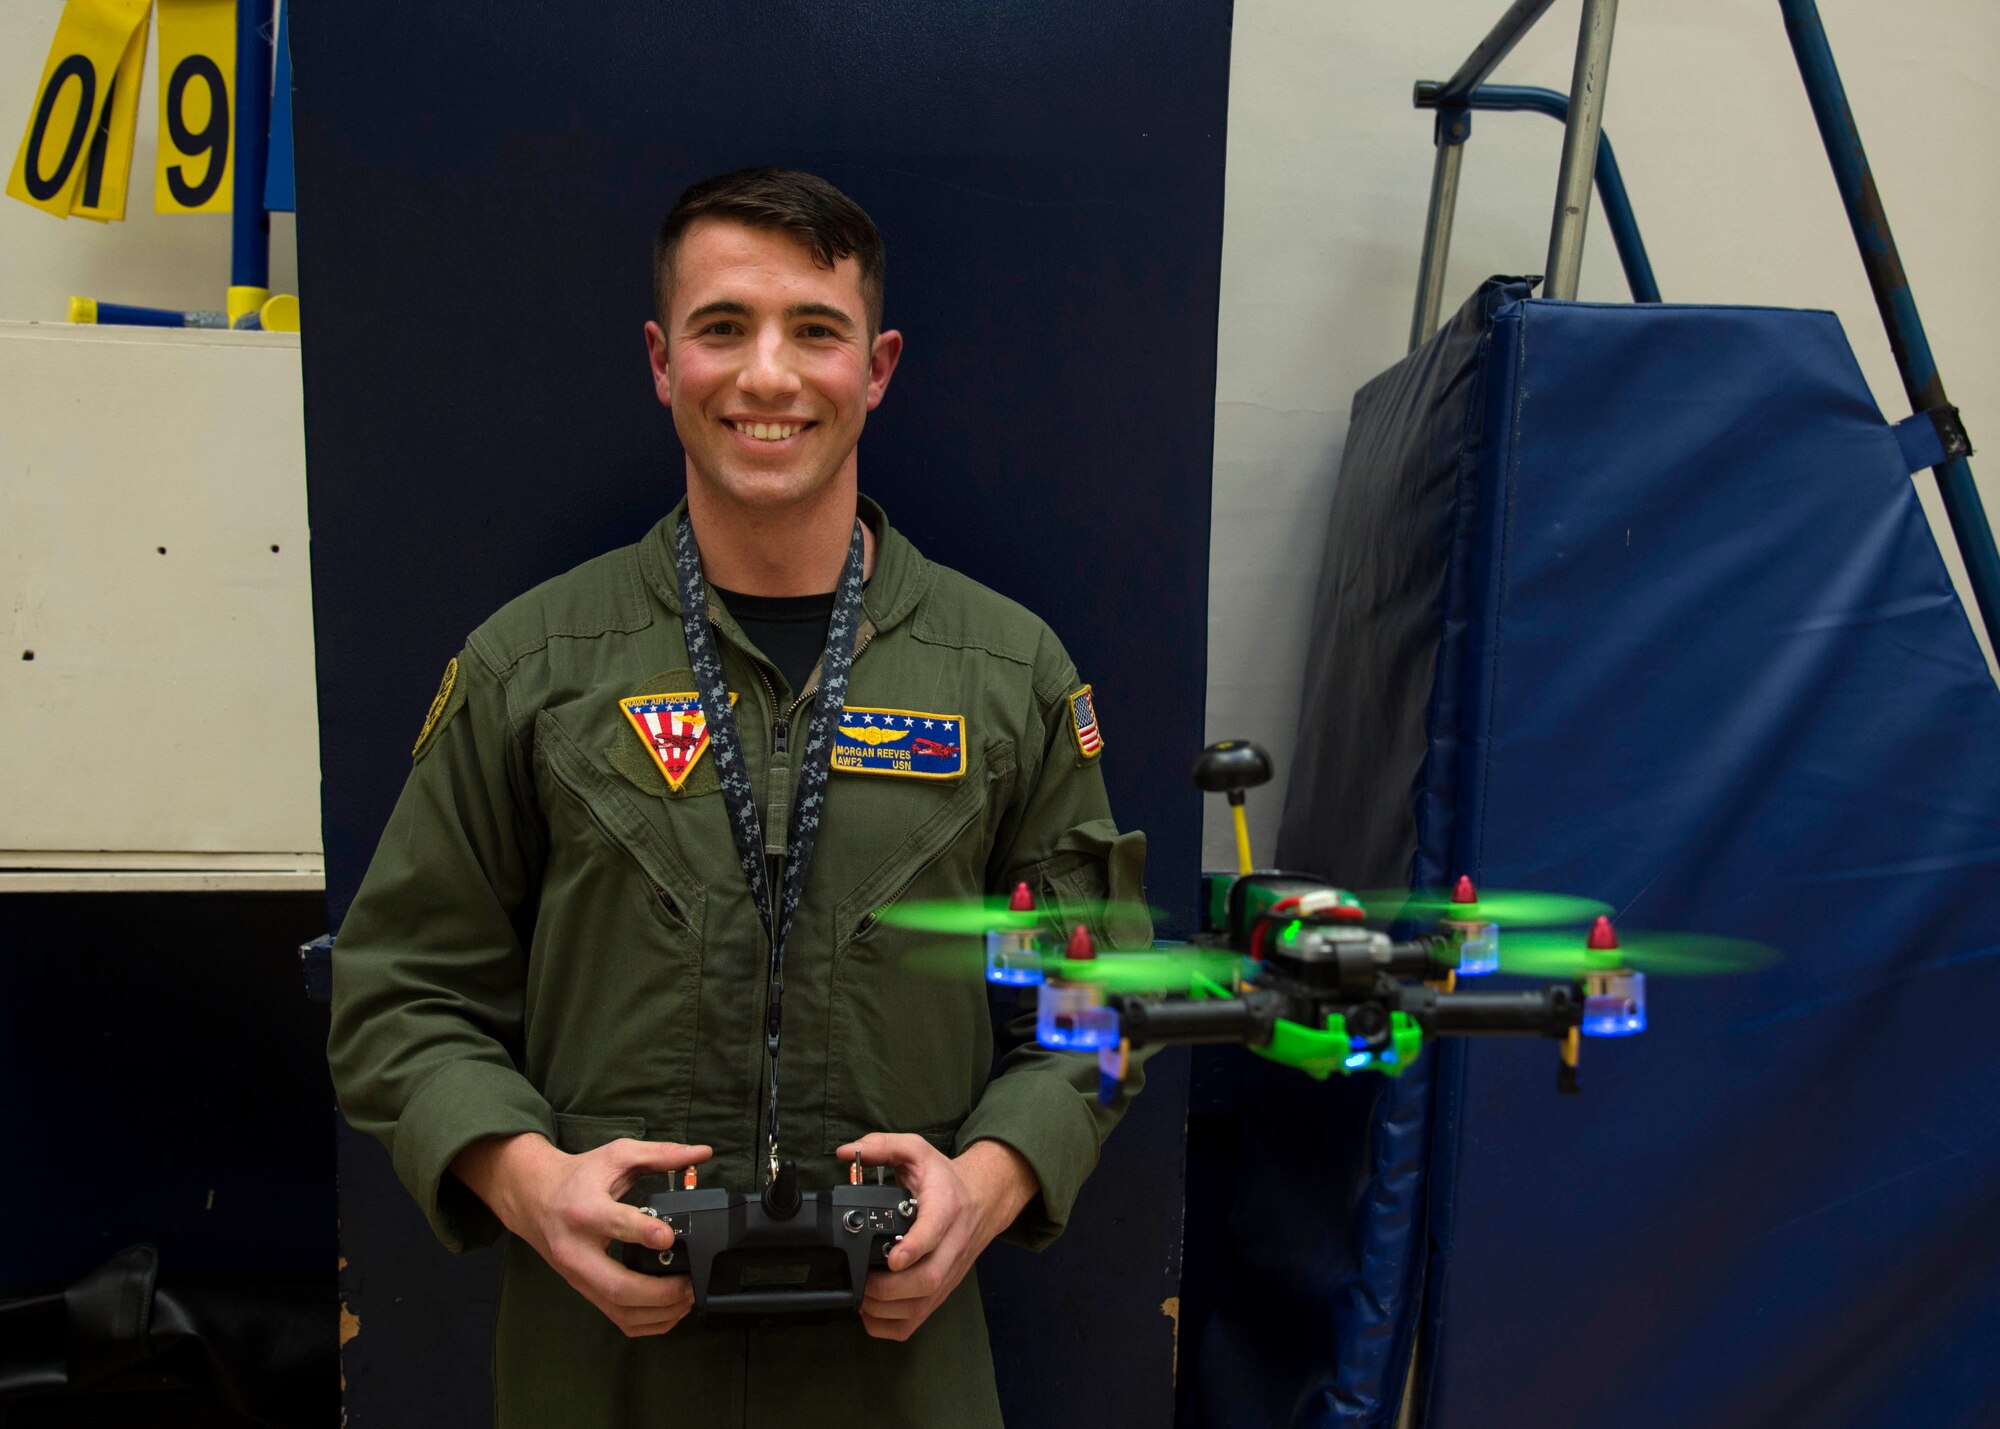 U.S. Navy Petty Officer 2nd Class Morgan Reeves, Naval Air Facility Misawa UC-12F Huron crewman, poses for a photo after a drone safety symposium at Misawa Air Base, Japan, Dec. 8, 2016. Reeves’ long passion of flying drones drove him to teach the importance of safety to children during the symposium. (U.S. Air Force photo by Senior Airman Deana Heitzman)